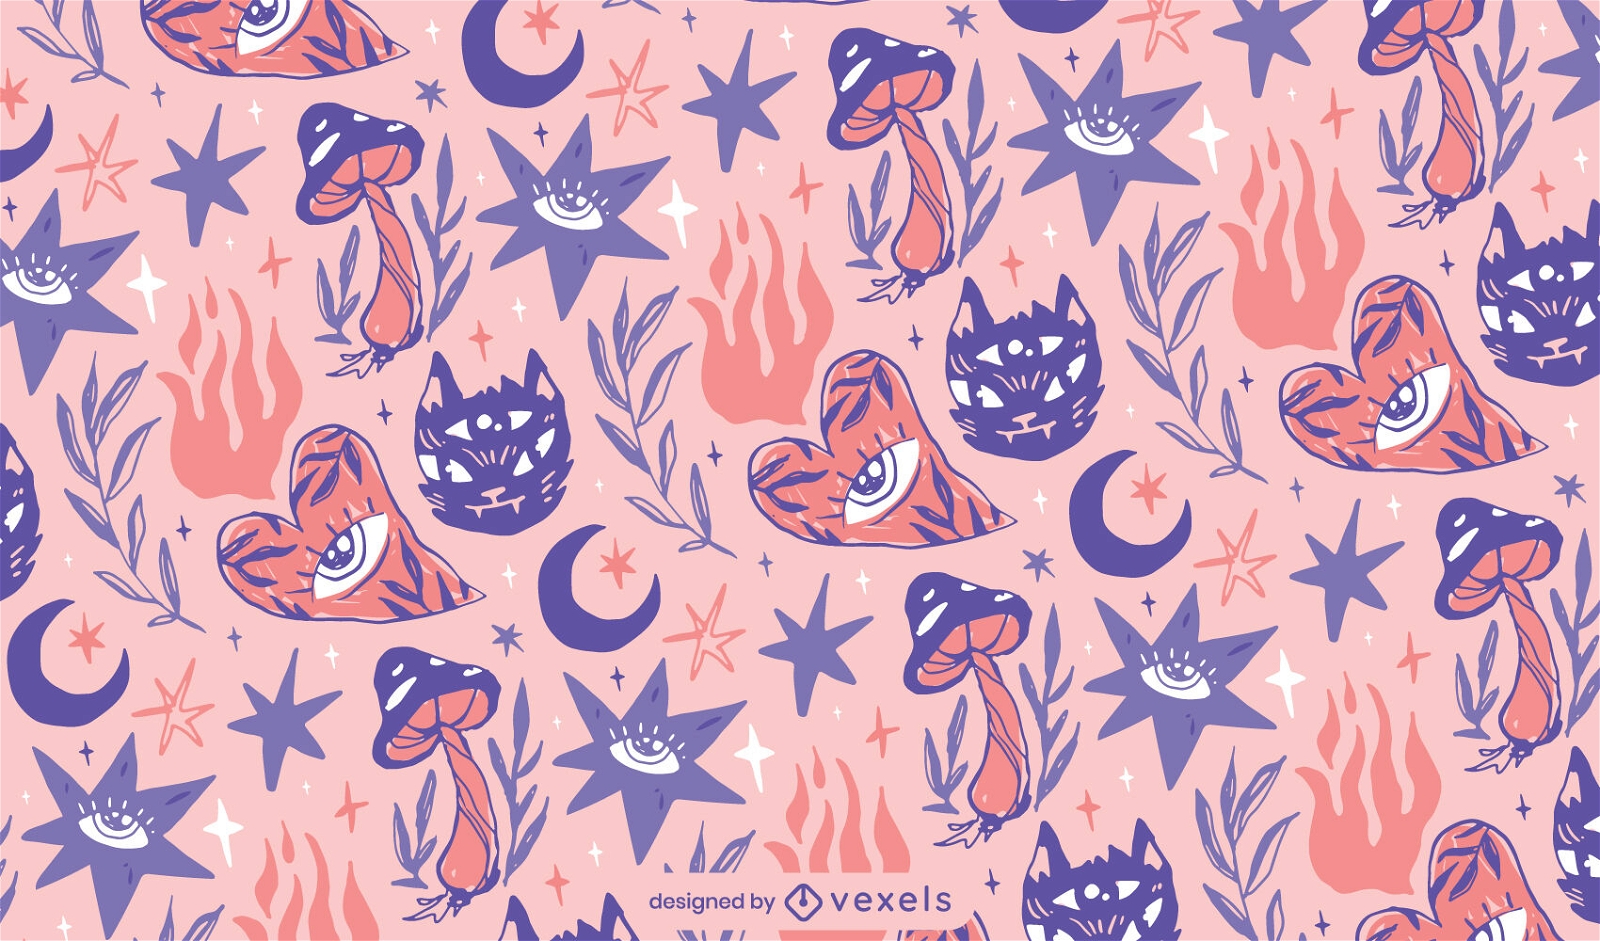 Mystical witchy elements pattern design